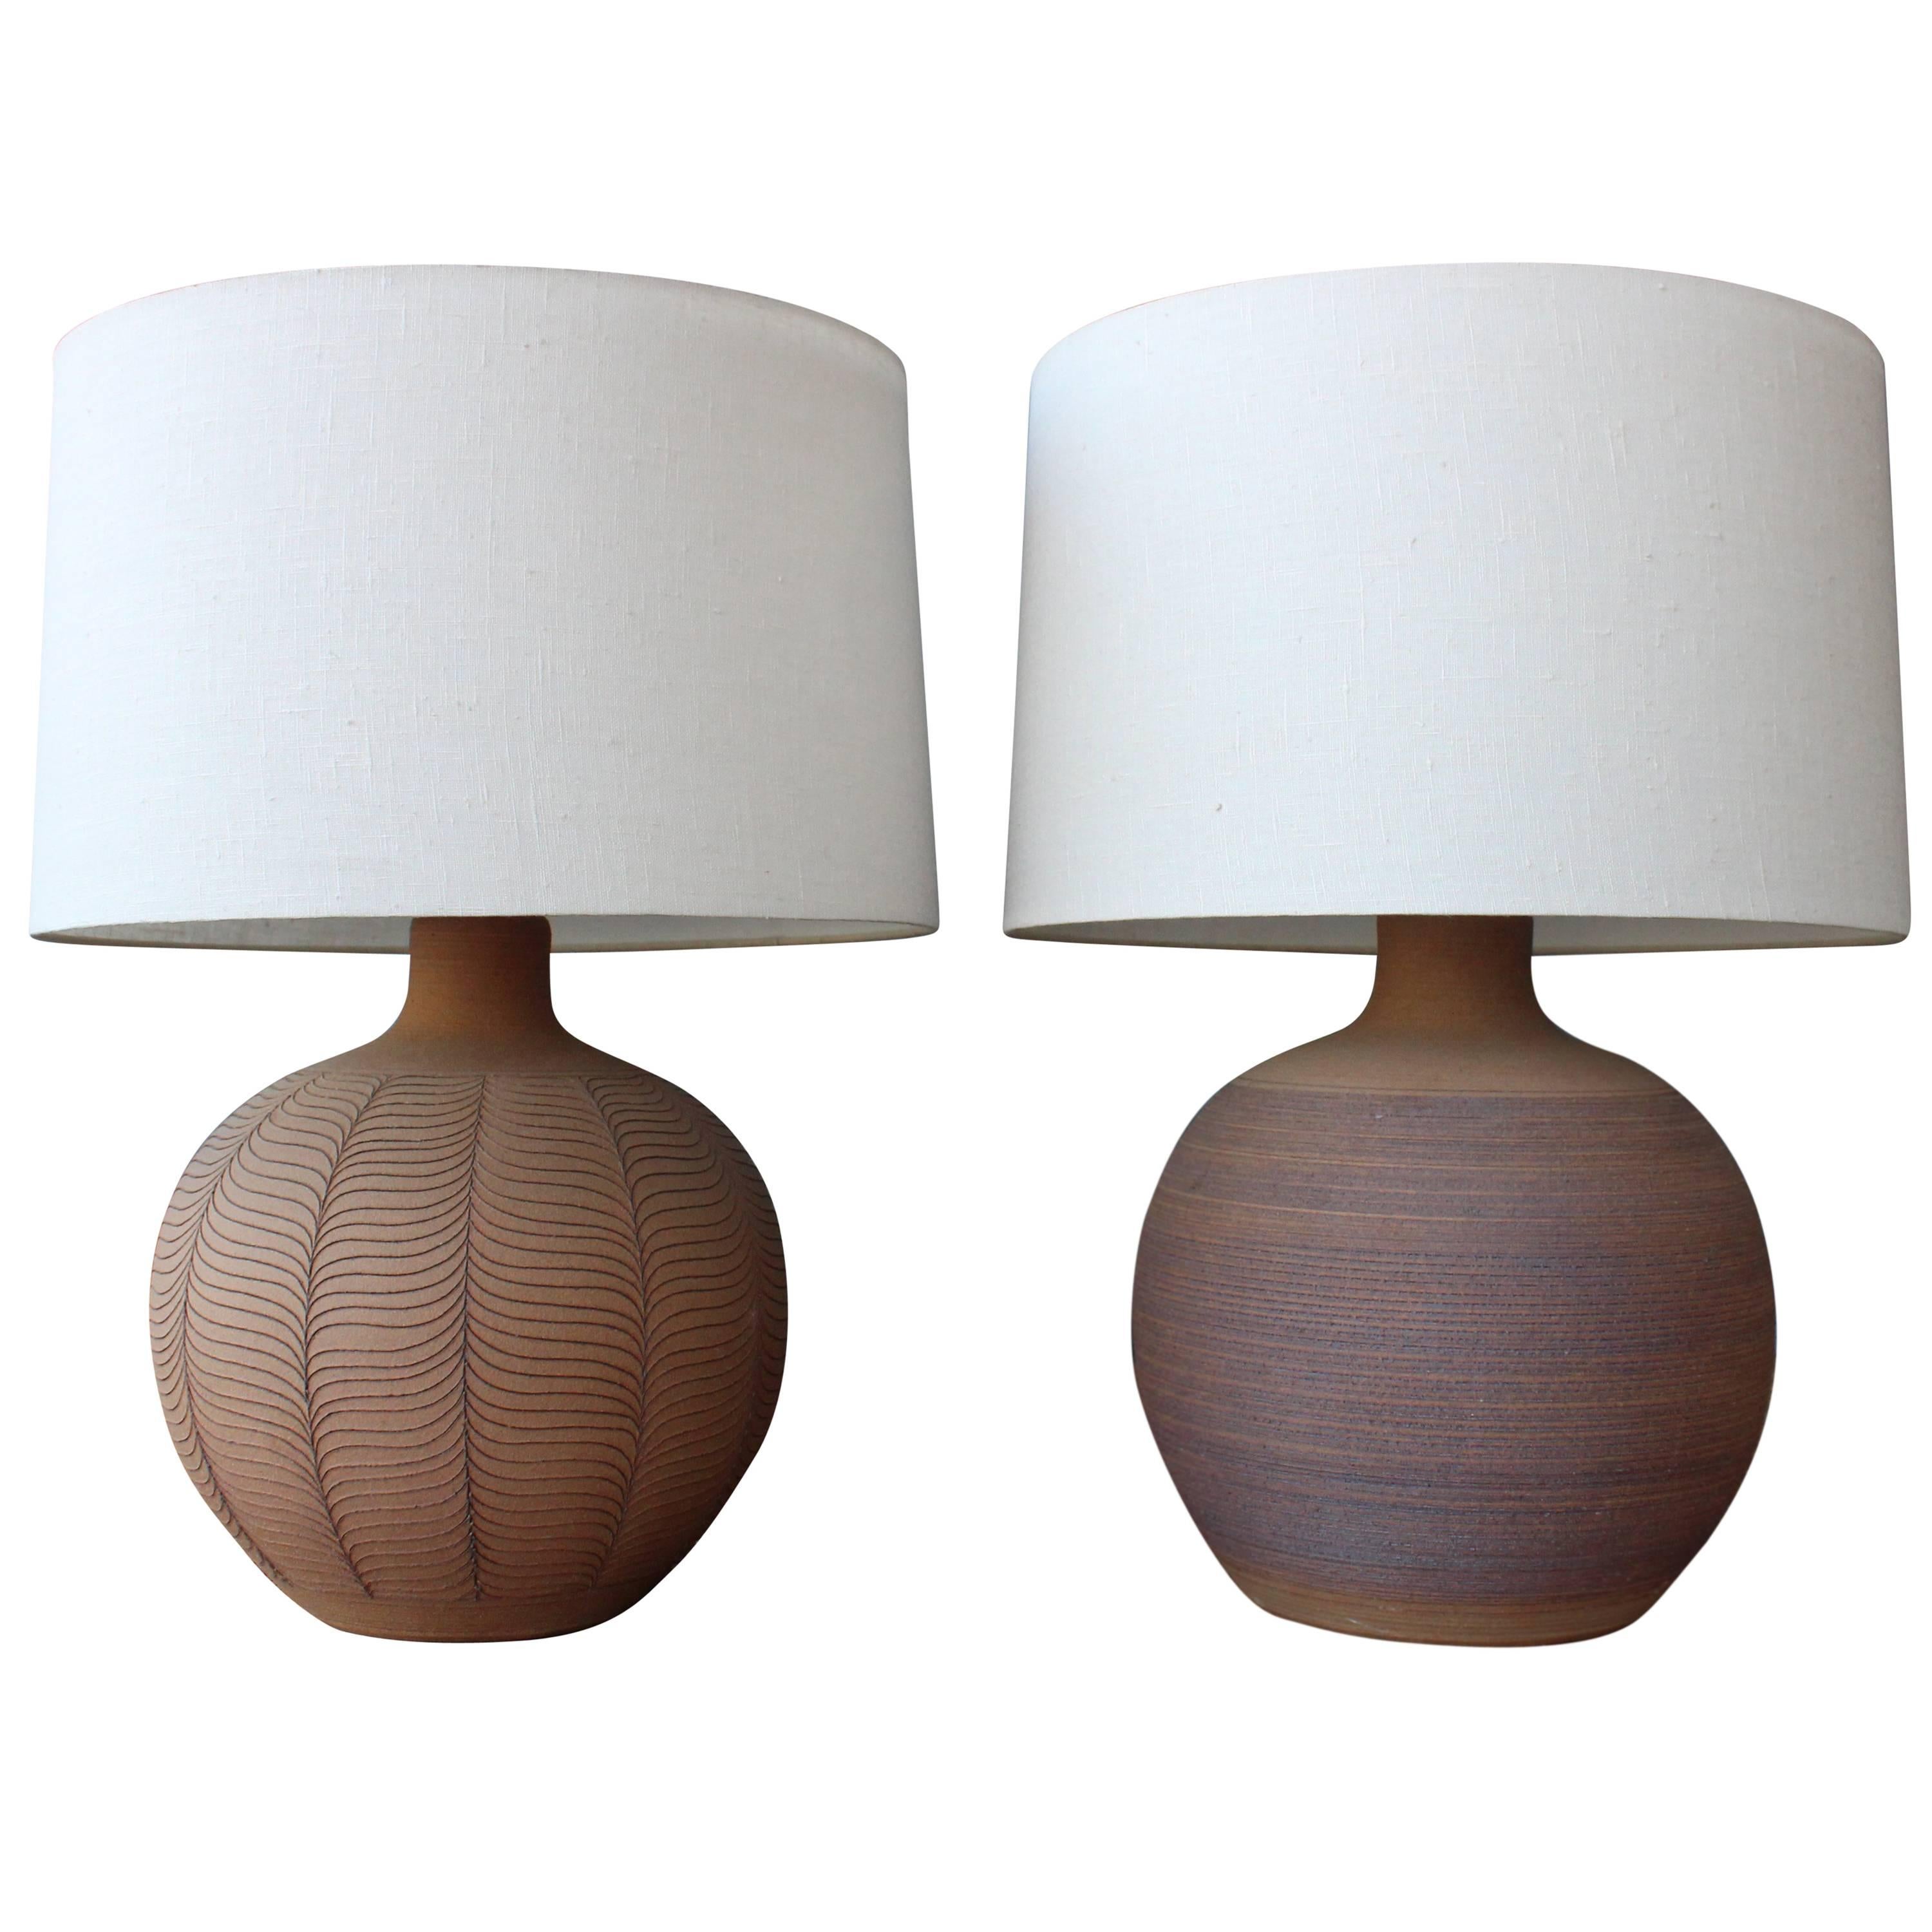 Pair of 1970s Studio Pottery Table Lamps